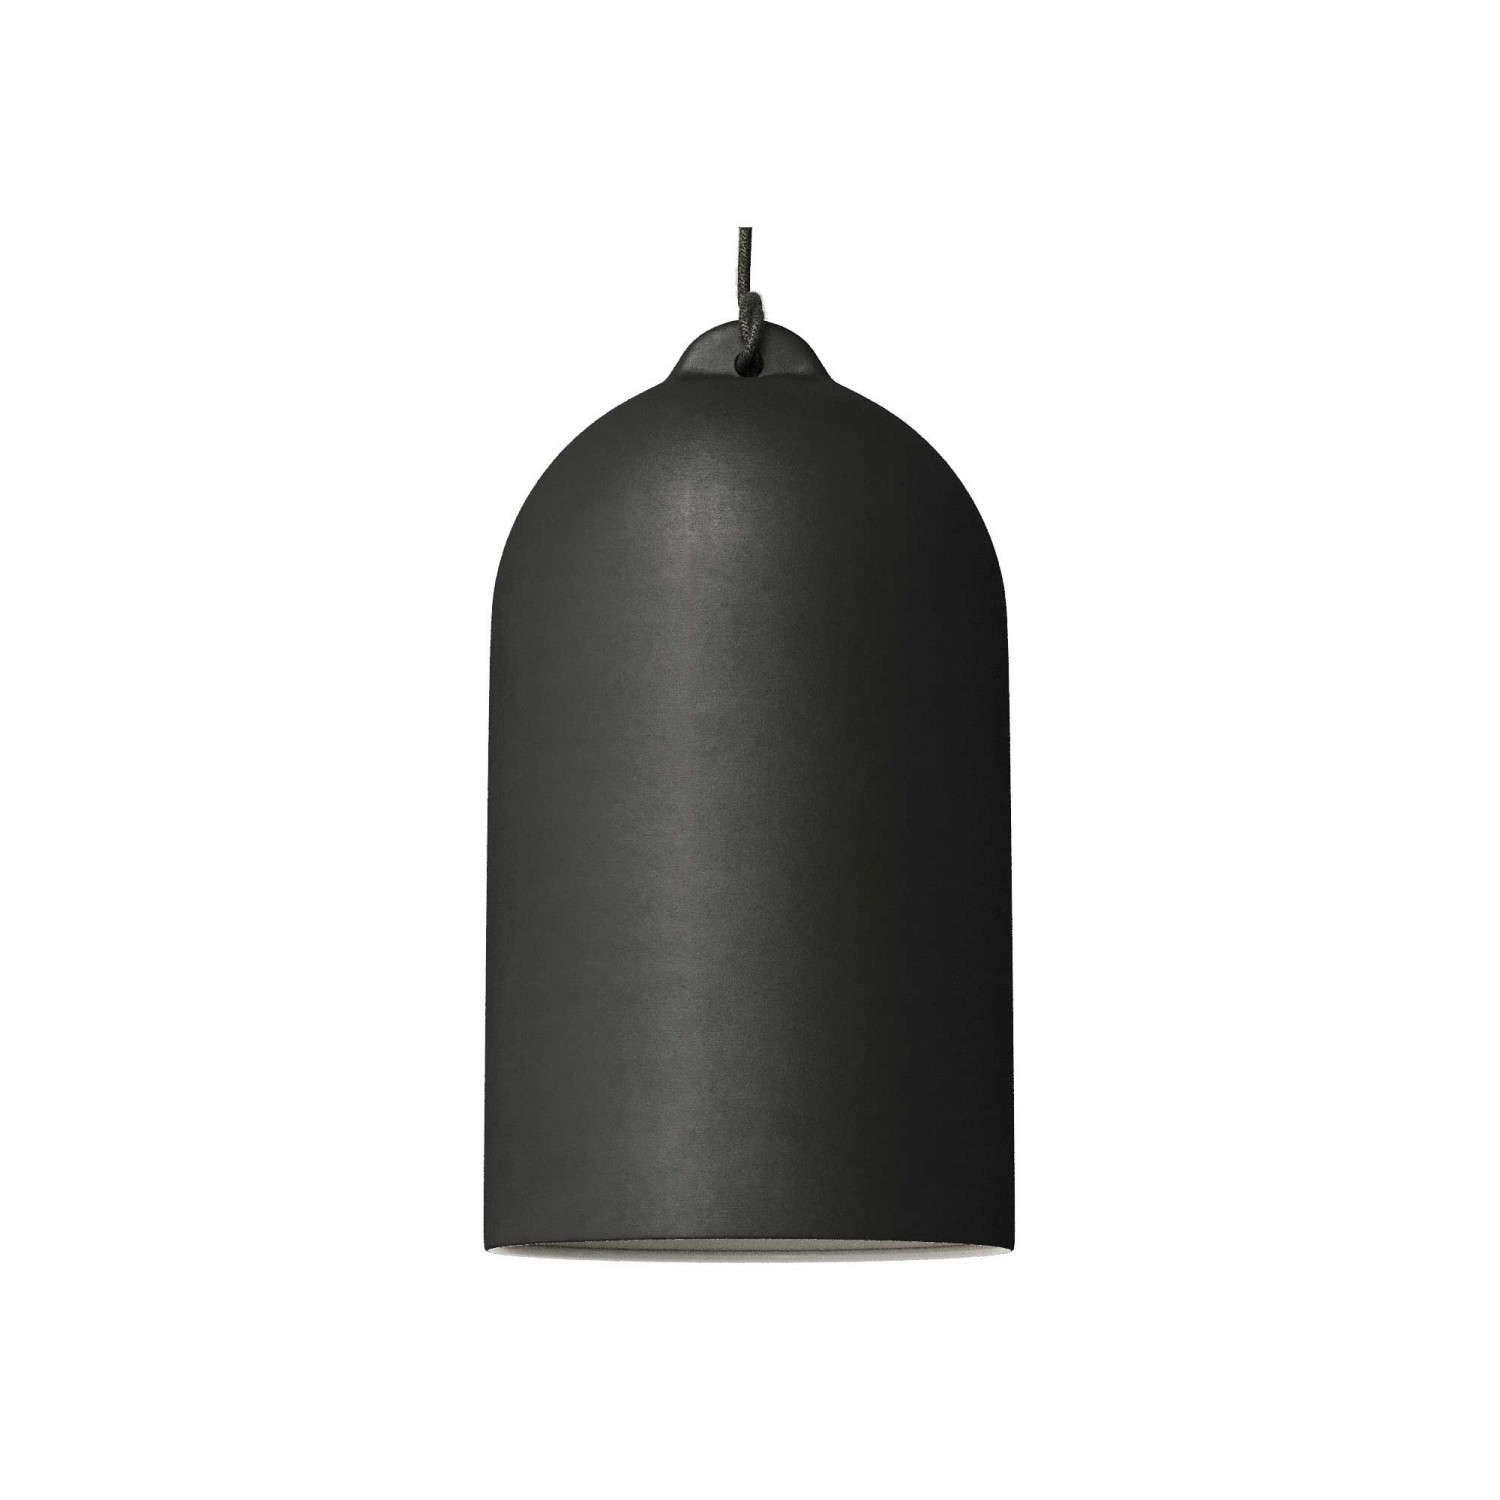 Pendant lamp with textile cable and Bell XL ceramic lampshade - Made in Italy